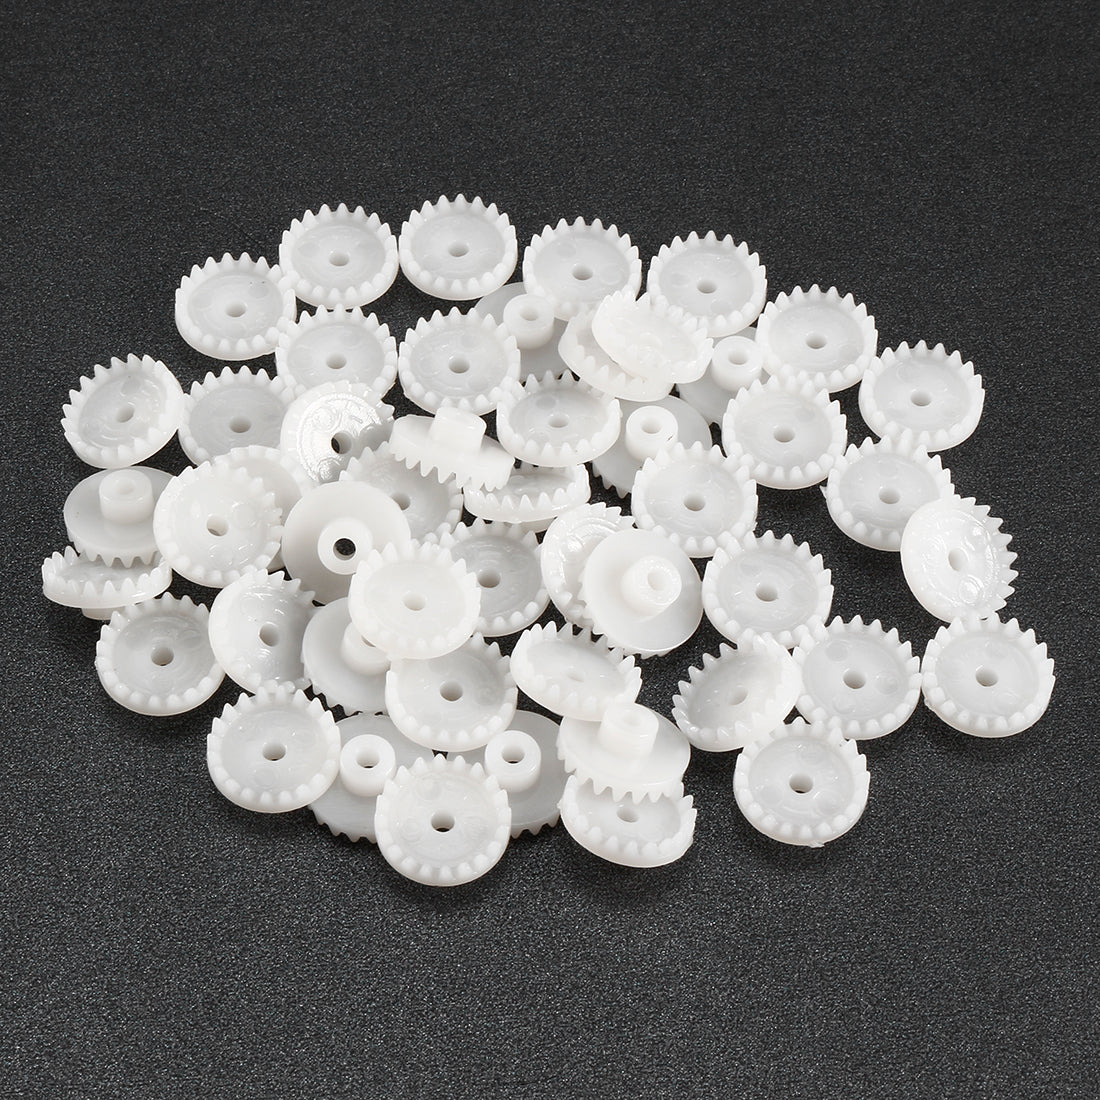 uxcell Uxcell 50Pcs C202A Plastic Gear Accessories with 20 Teeth for DIY Car Robot Motor